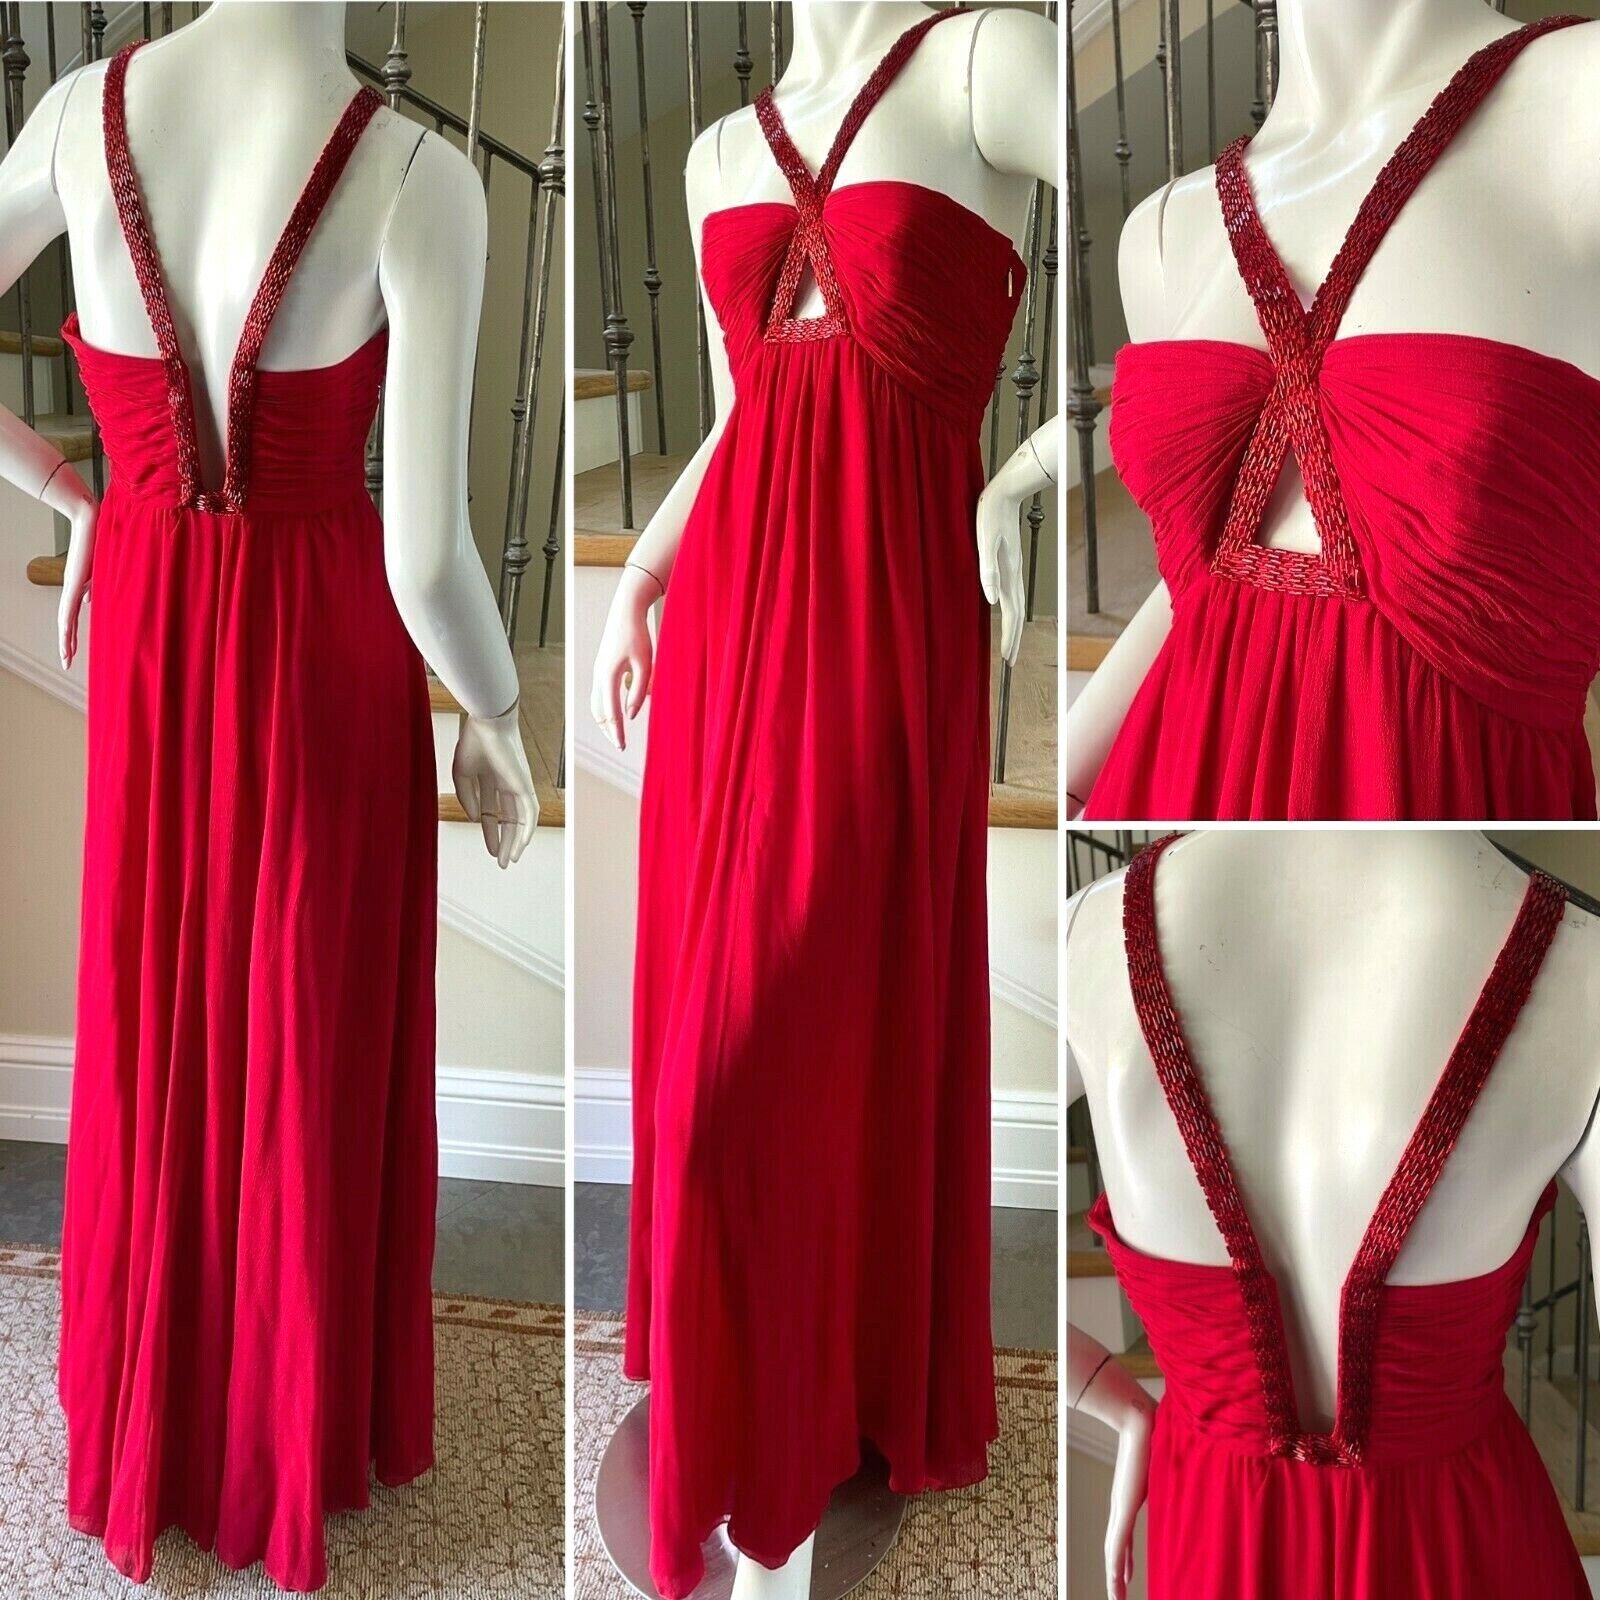 Roberto Cavalli Vintage Red Silk Evening Dress with Keyhole Beaded Details